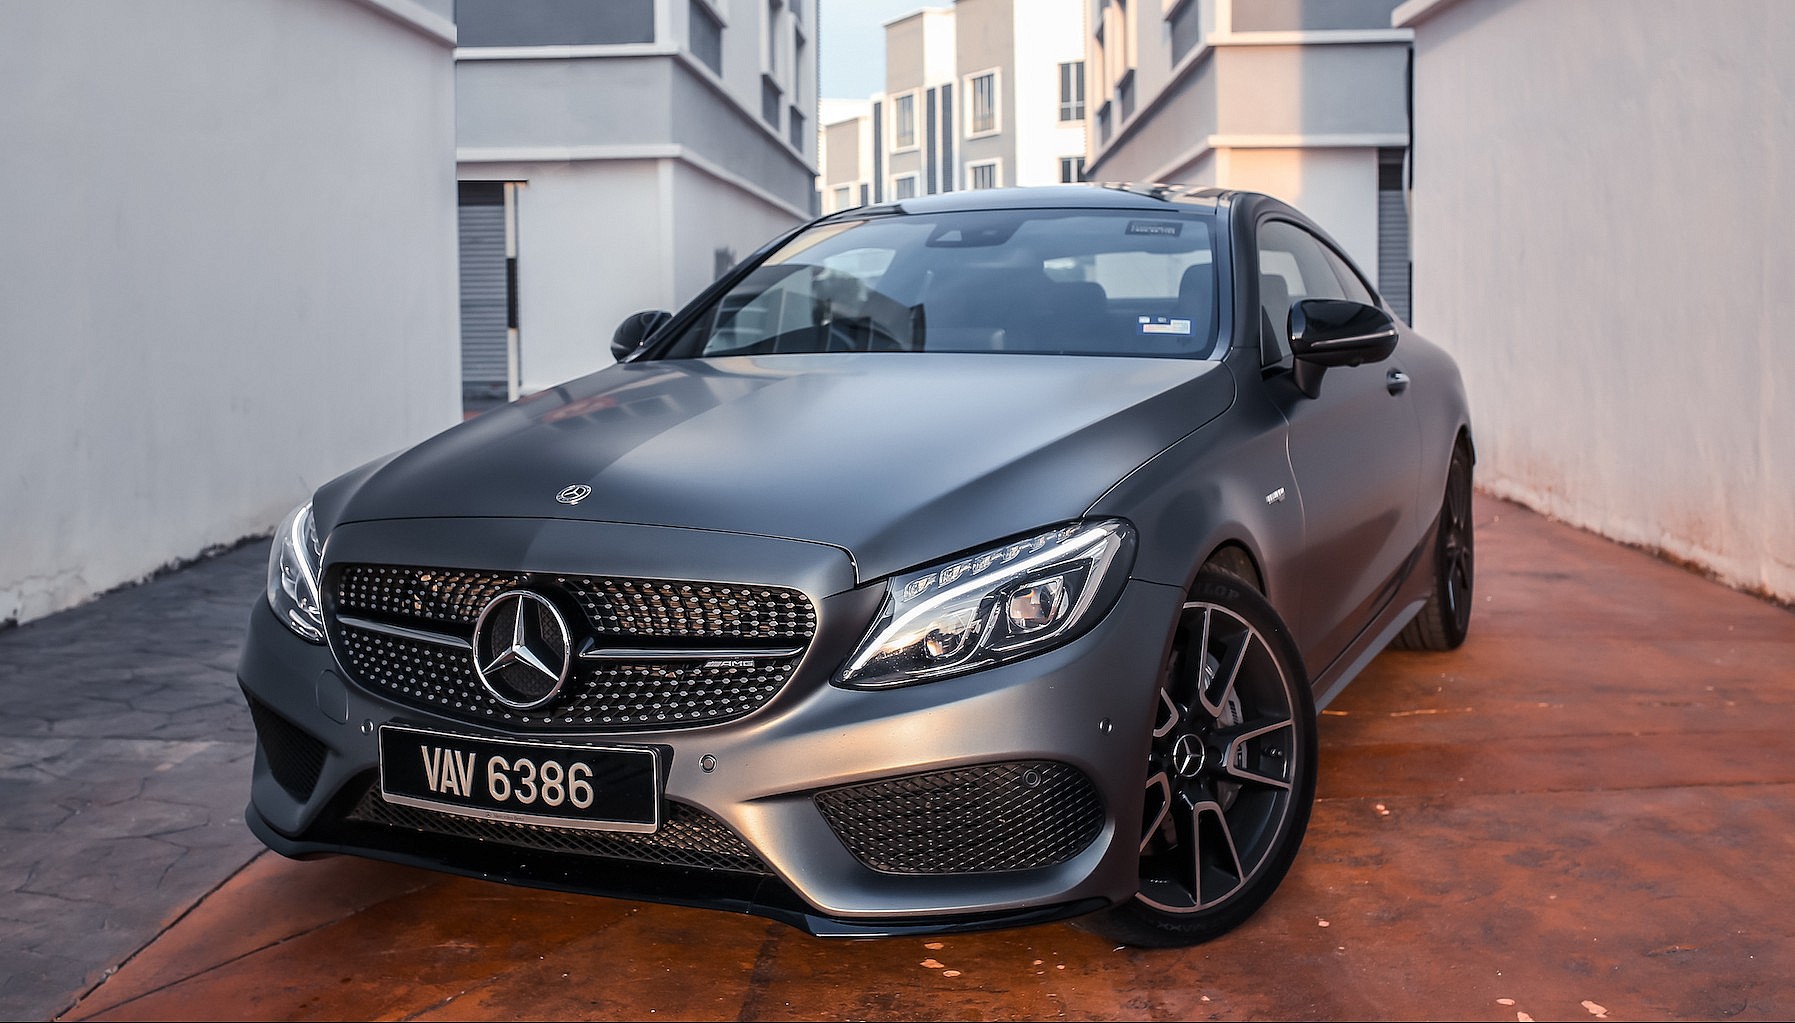 The Impressive Mercedes Benz Amg C 43 Coupe Is A Jubilation Of Dynamics